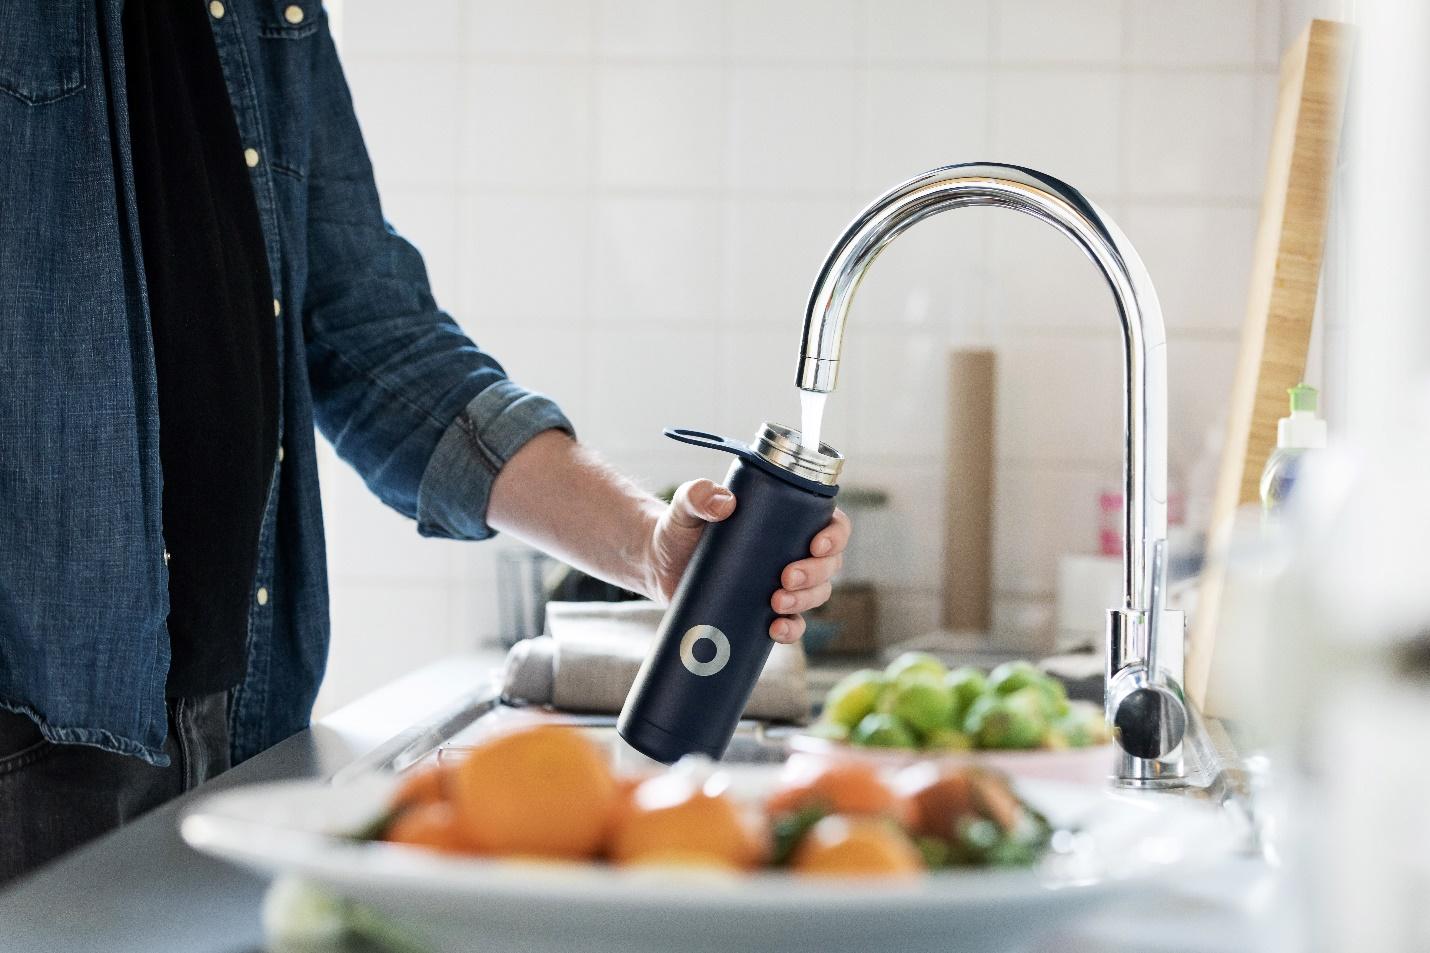 Touchless kitchen faucets